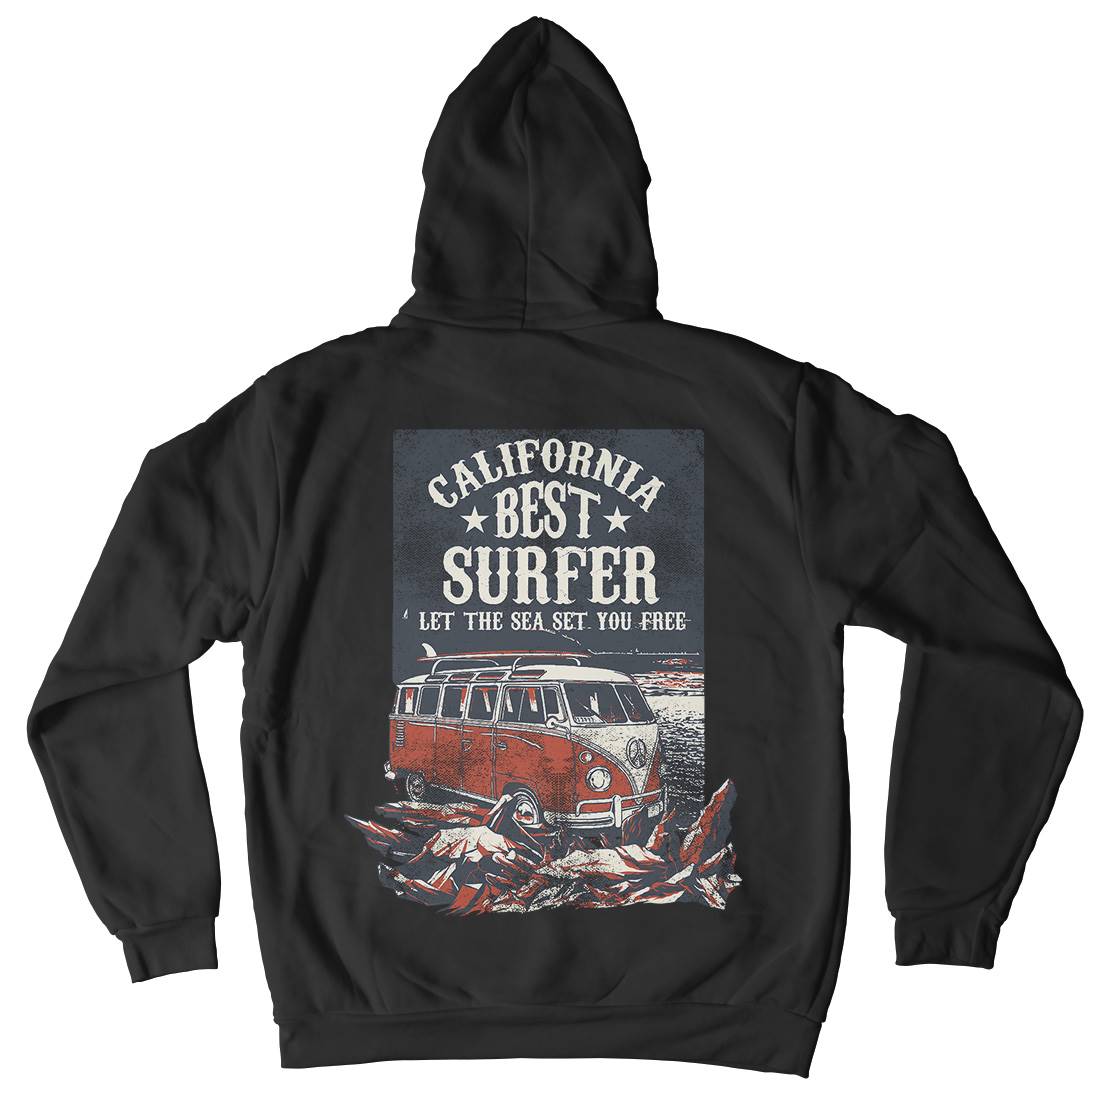 Let The Sea Set You Free Kids Crew Neck Hoodie Surf C956